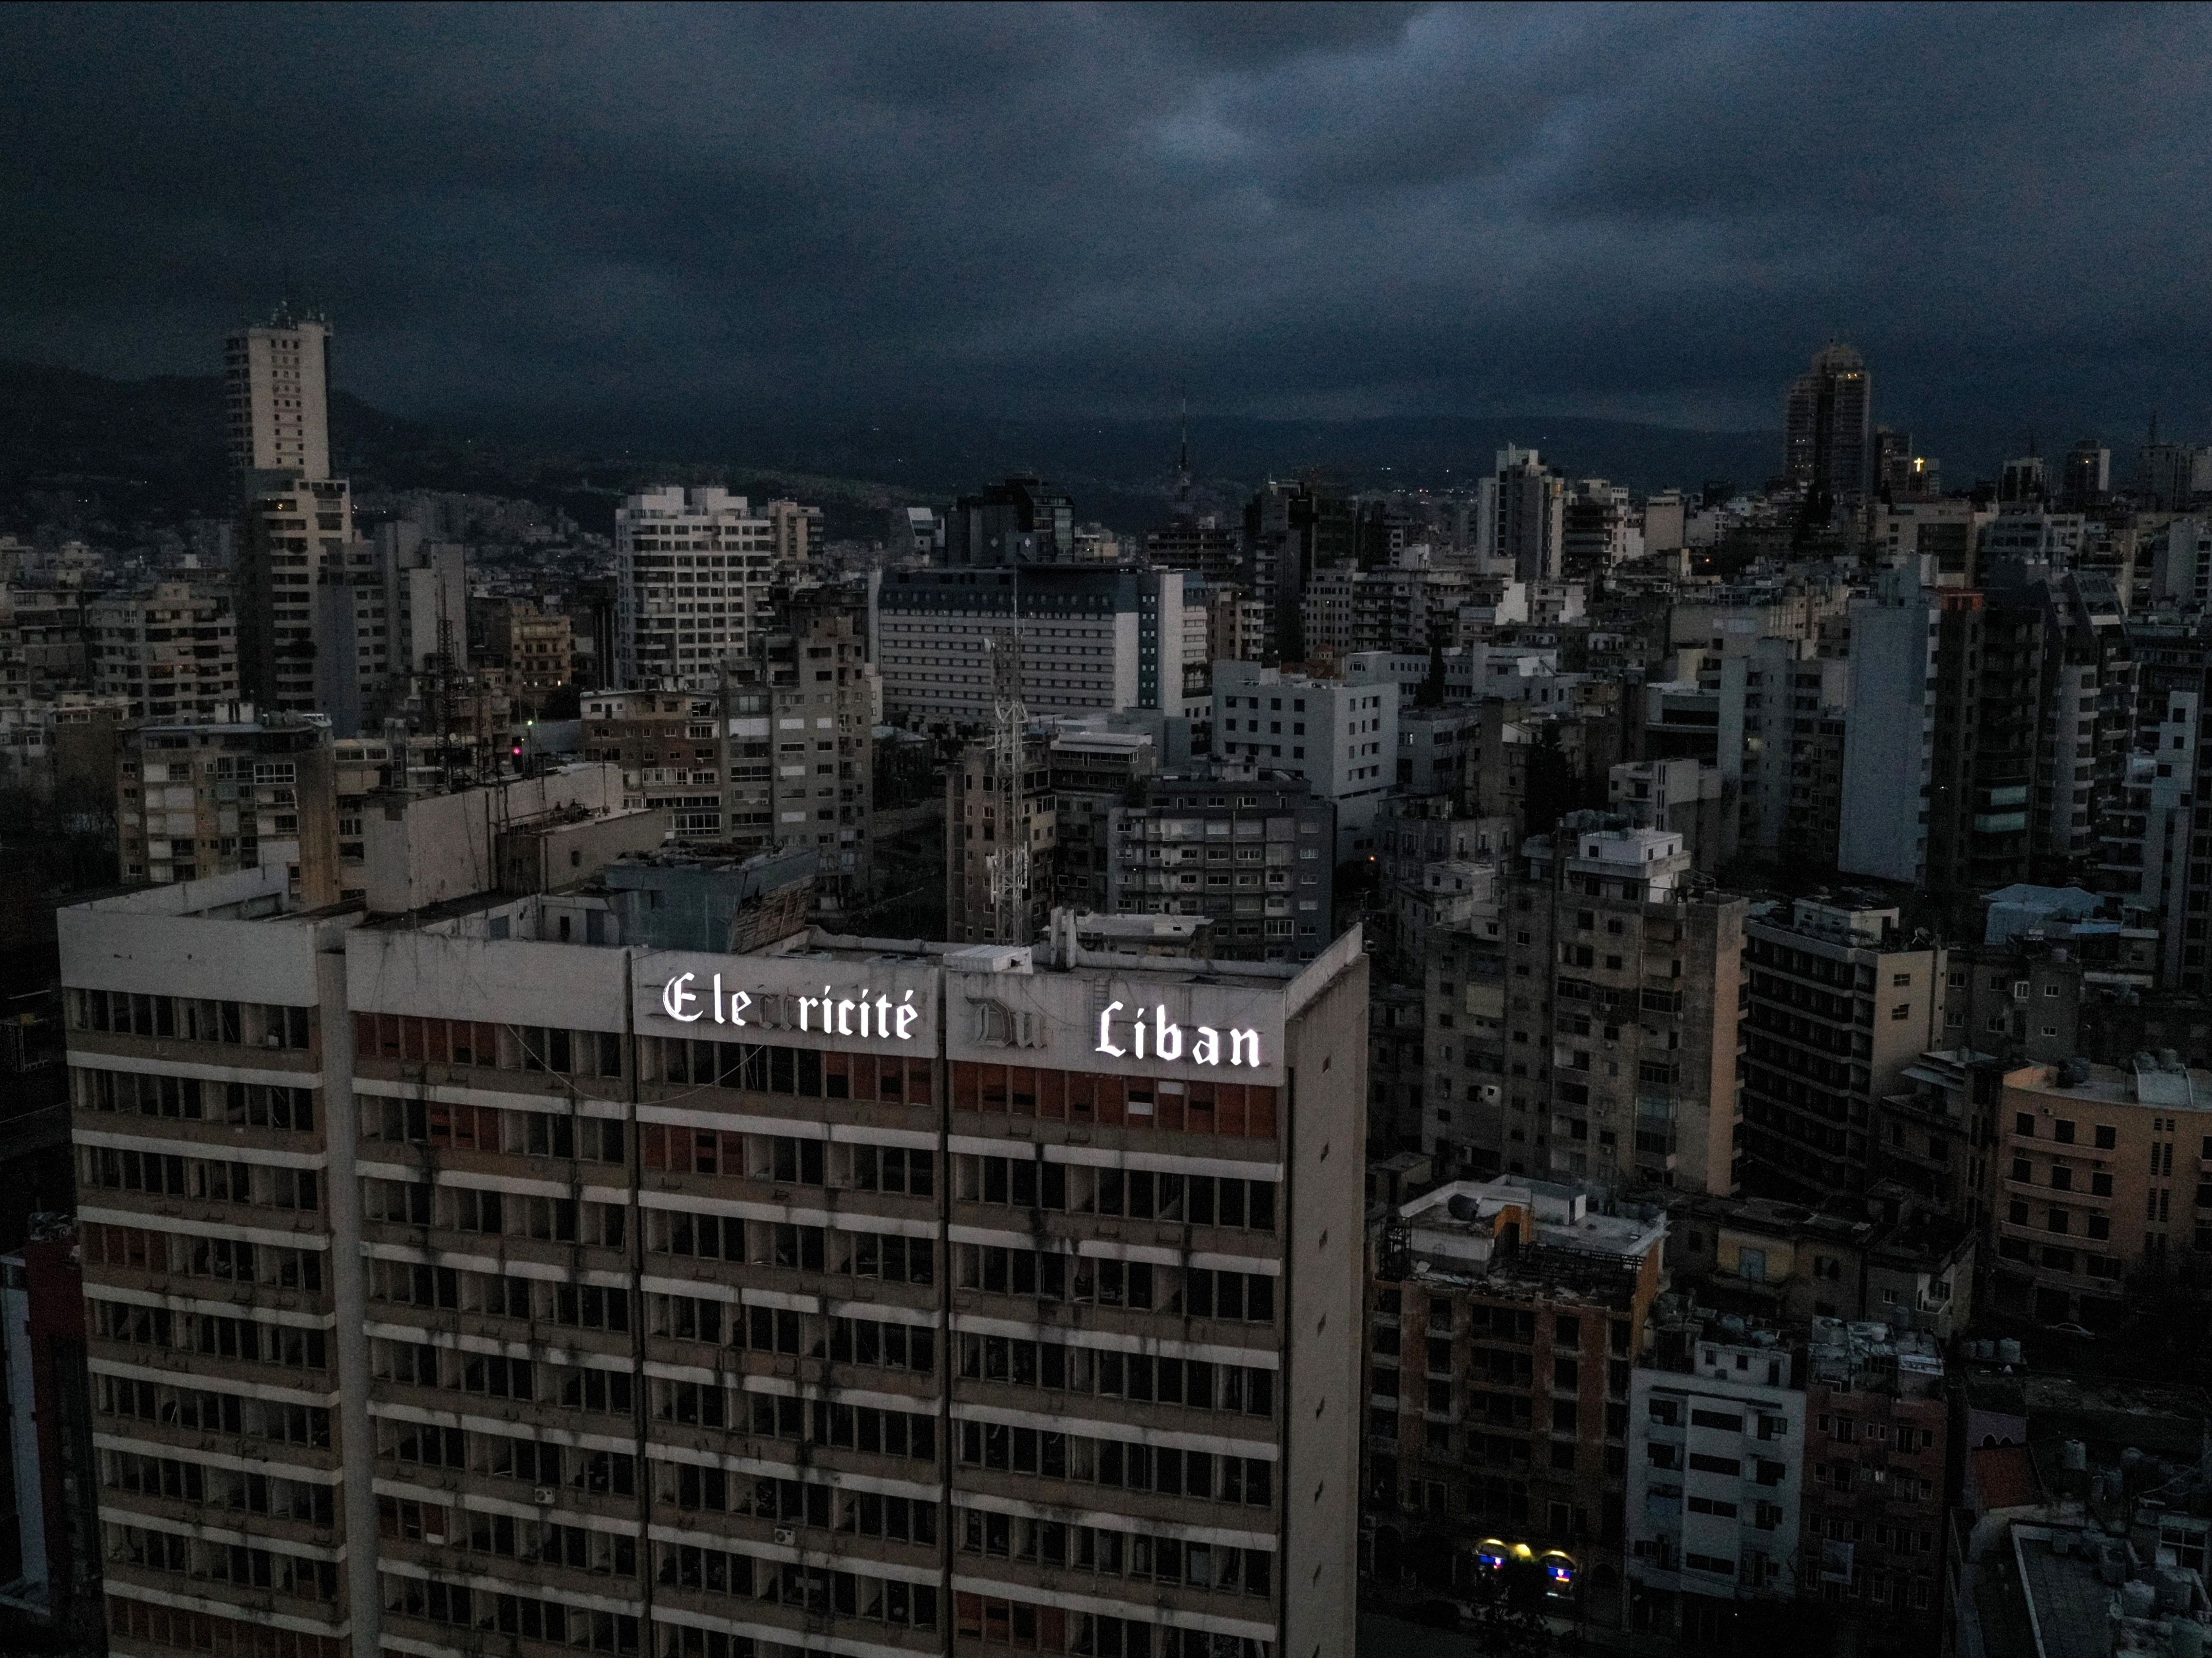 An aerial view shows Lebanon’s capital Beirut in darkness during power outage on 3 April